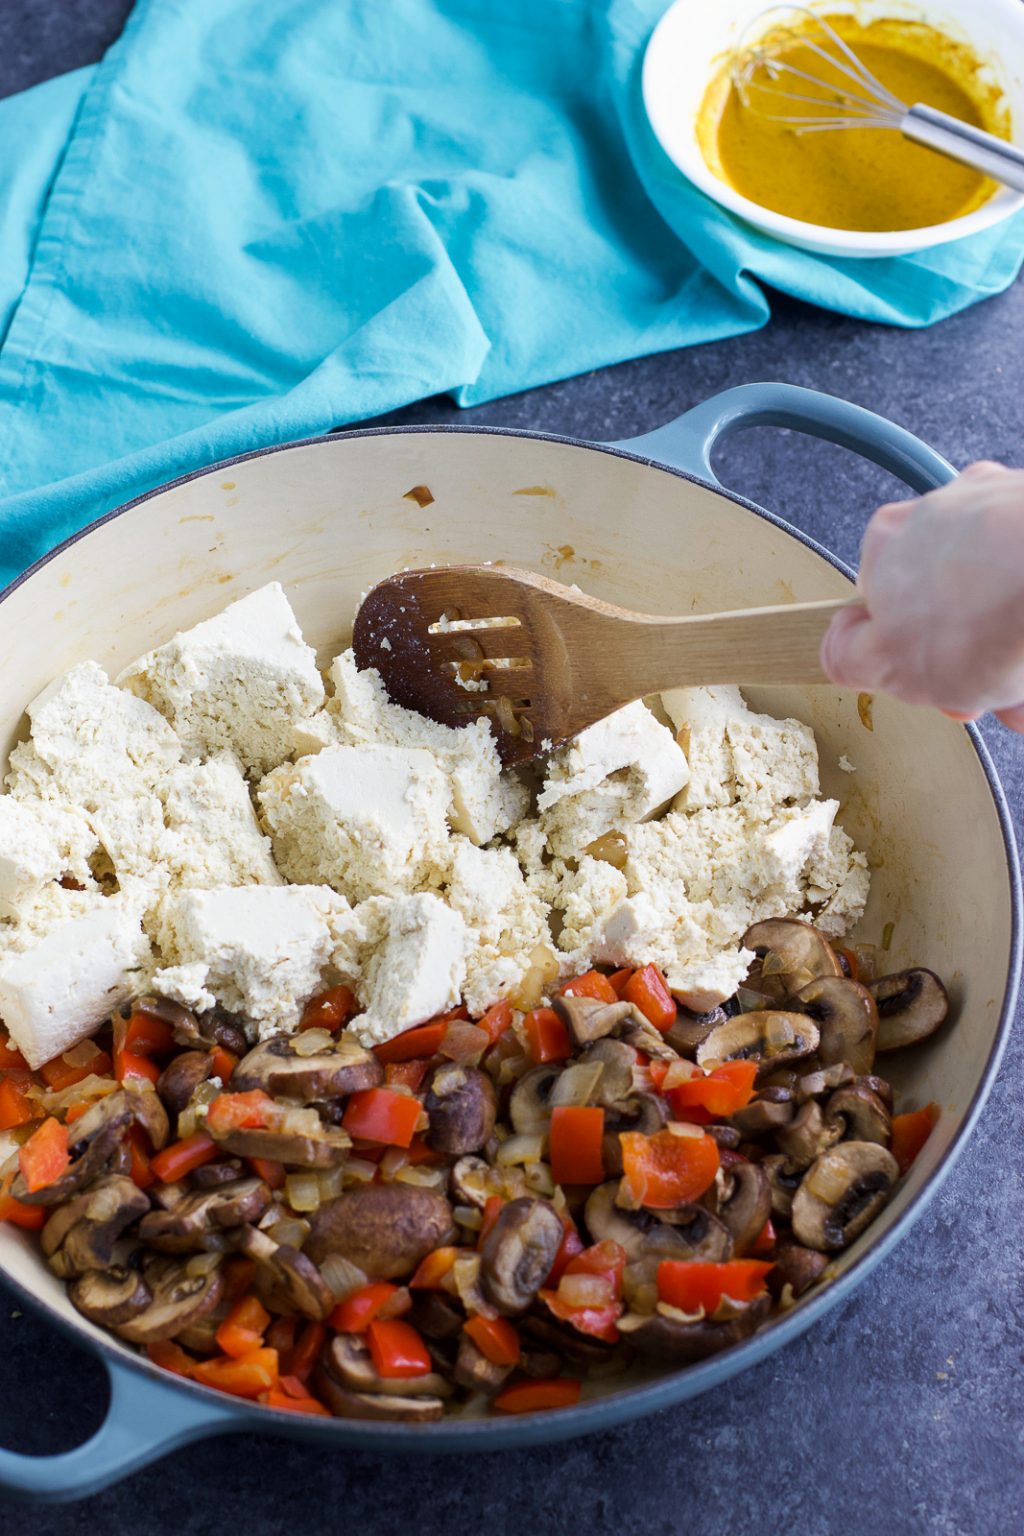 A hand stirring crumbled tofu and vegetables in a large blue pan next to a small bowl on a dark background.